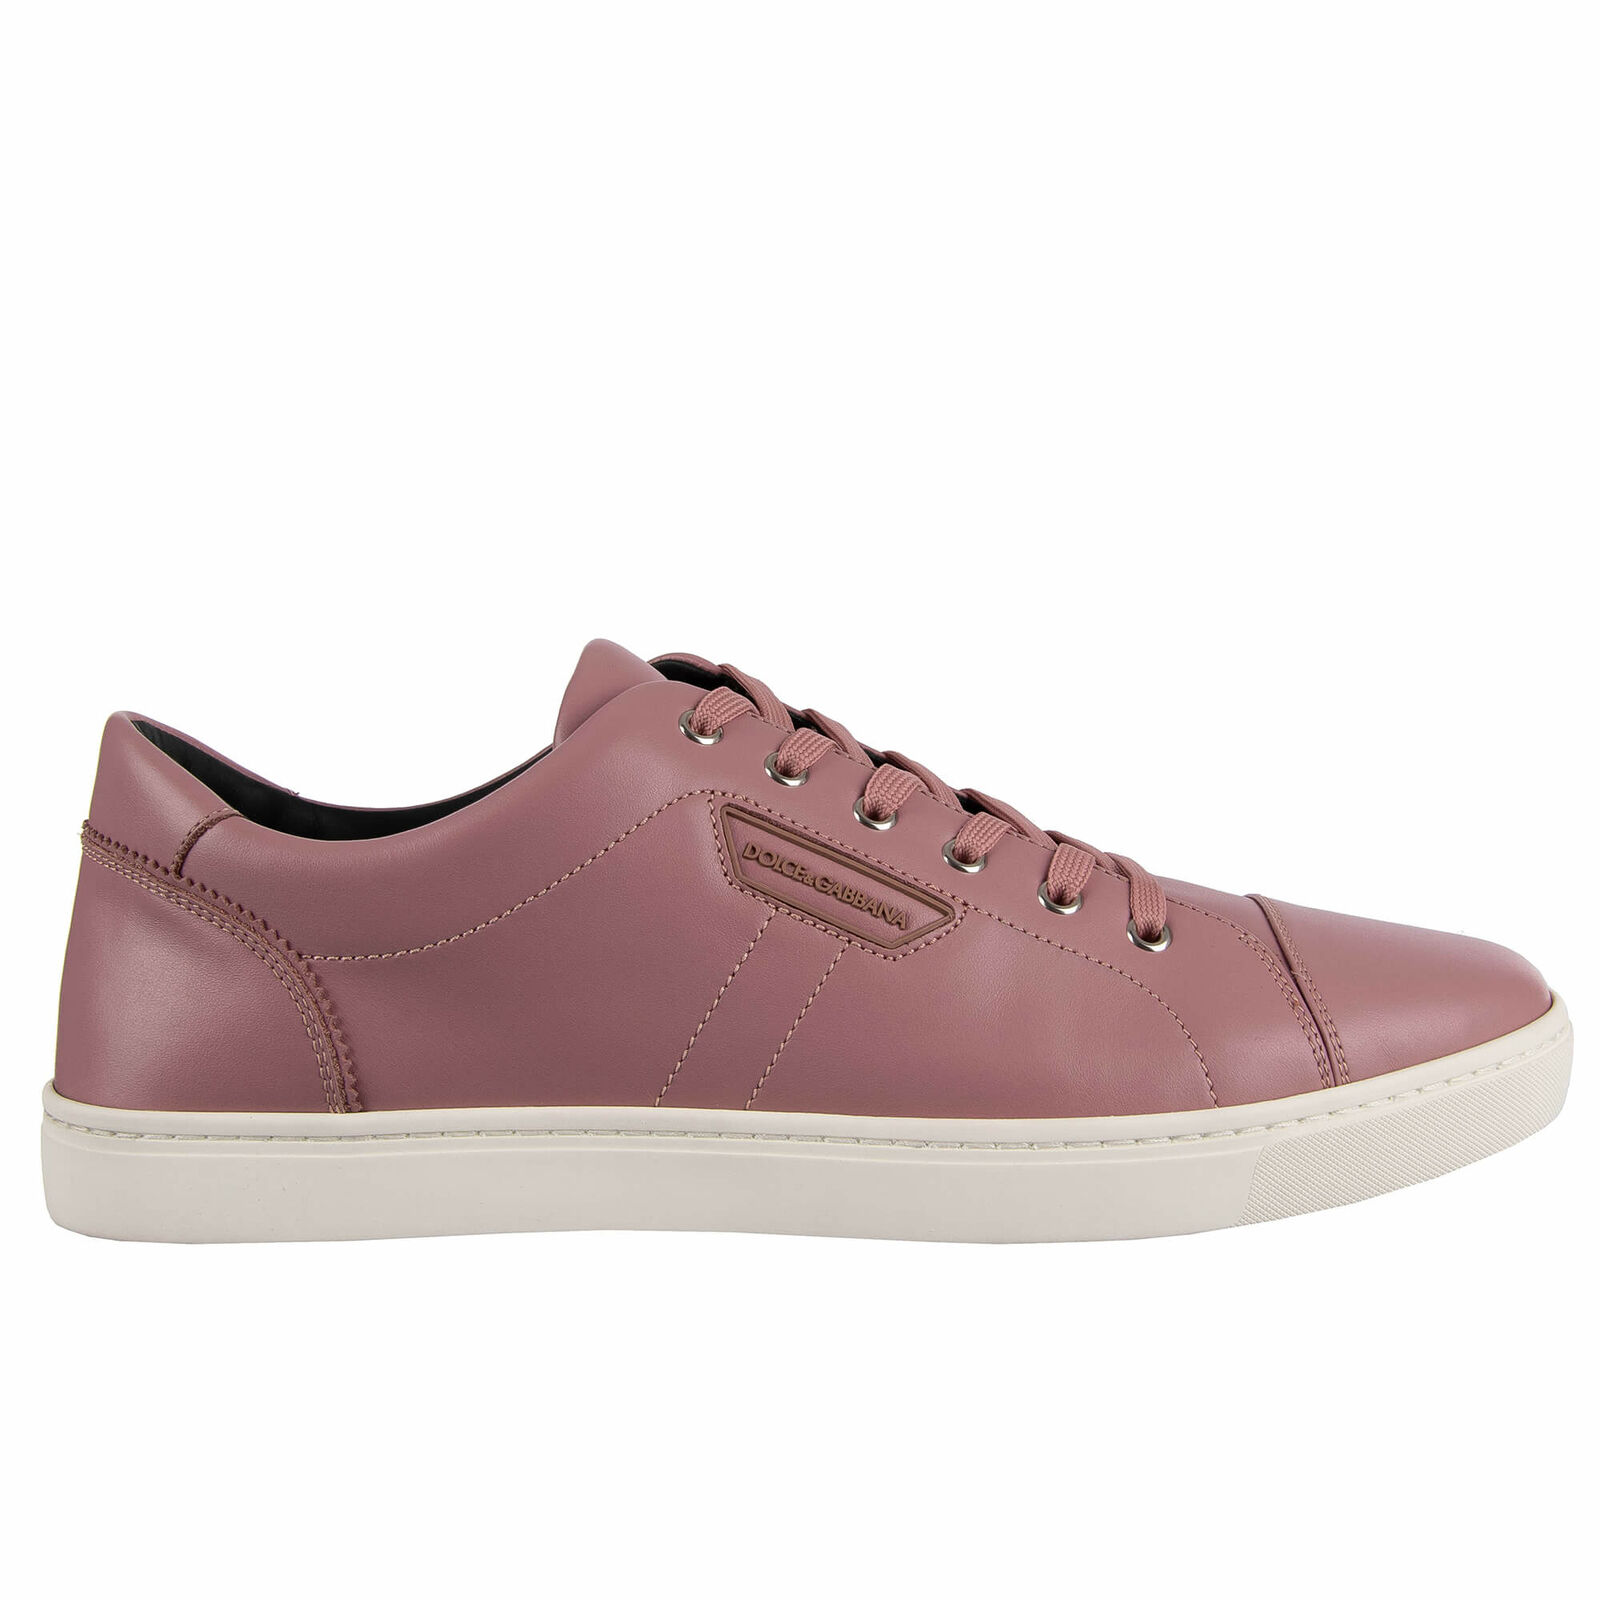 DOLCE & GABBANA Classic Leather Sneaker Shoes LONDON Logo Pink Rose 08542